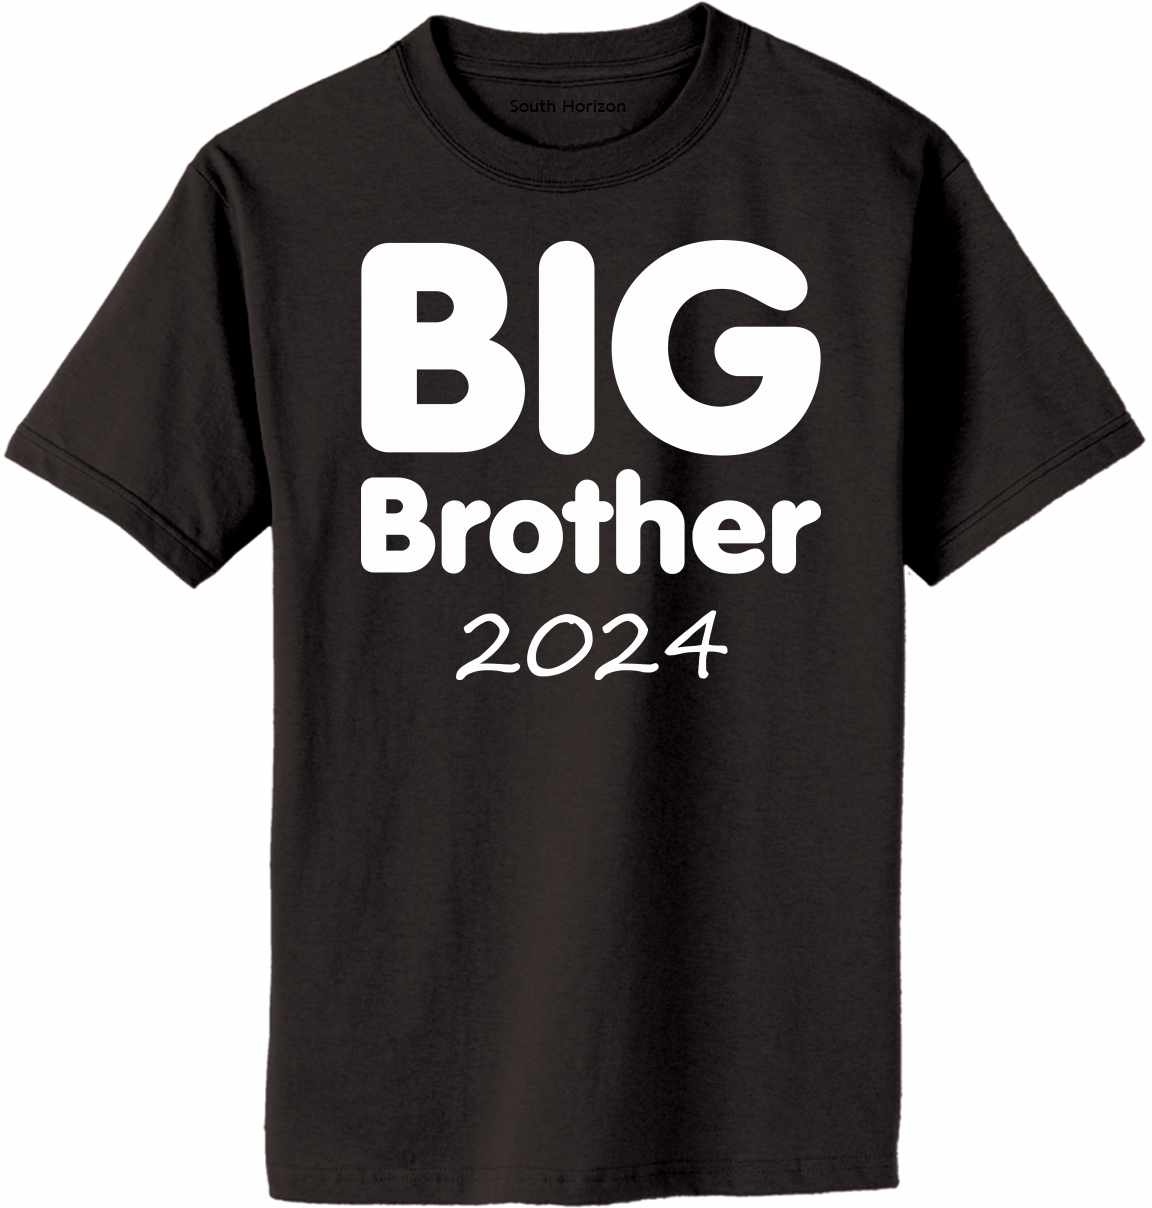 Big Brother 2024 on Adult T-Shirt (#1368-1)